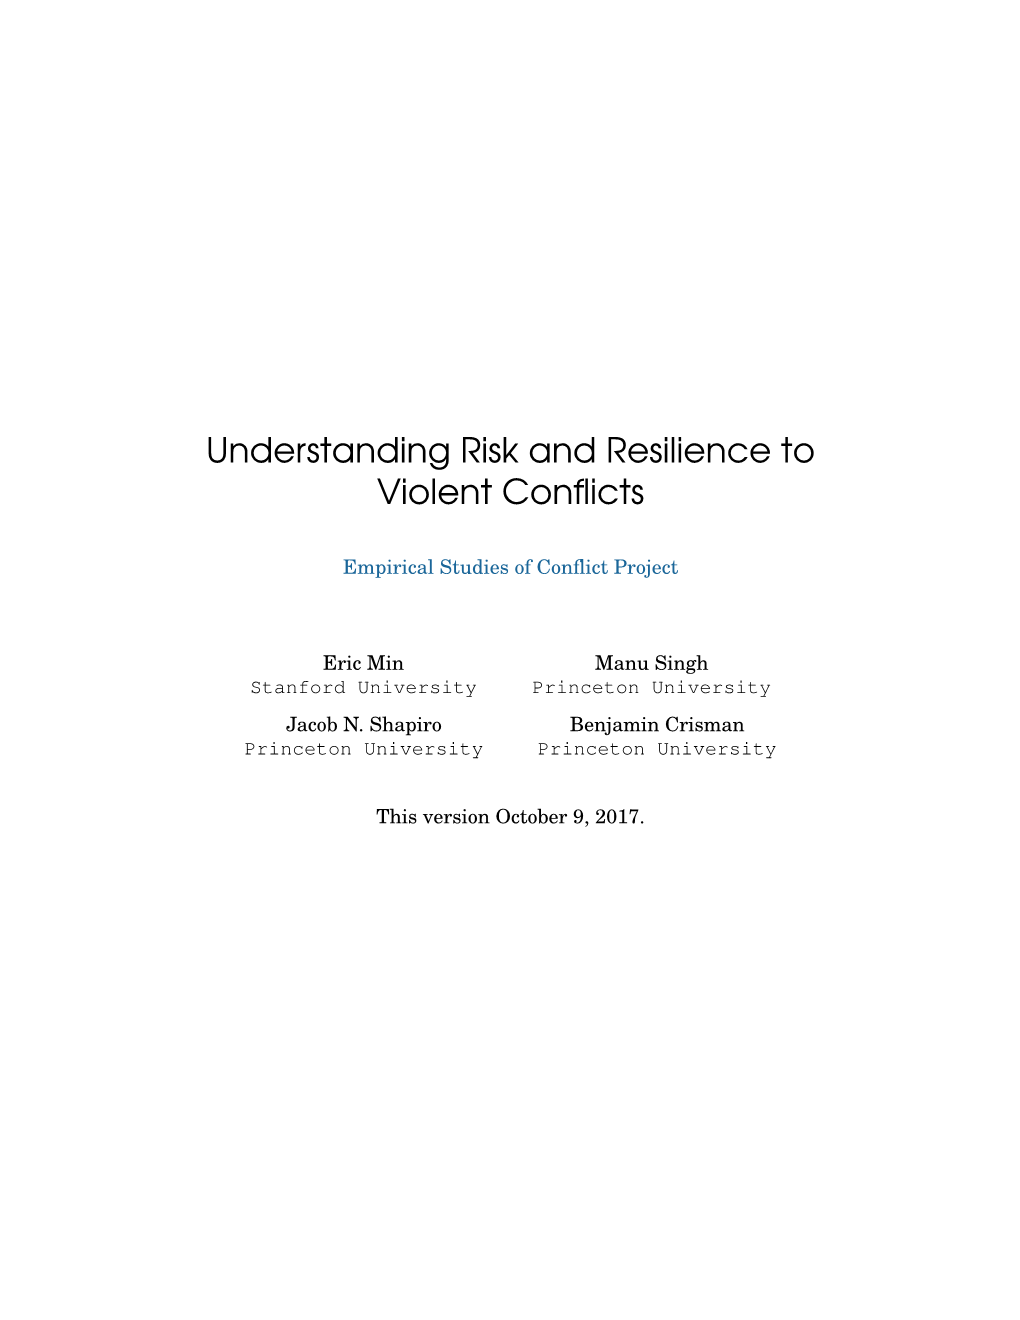 Understanding Risk and Resilience to Violent Conflicts